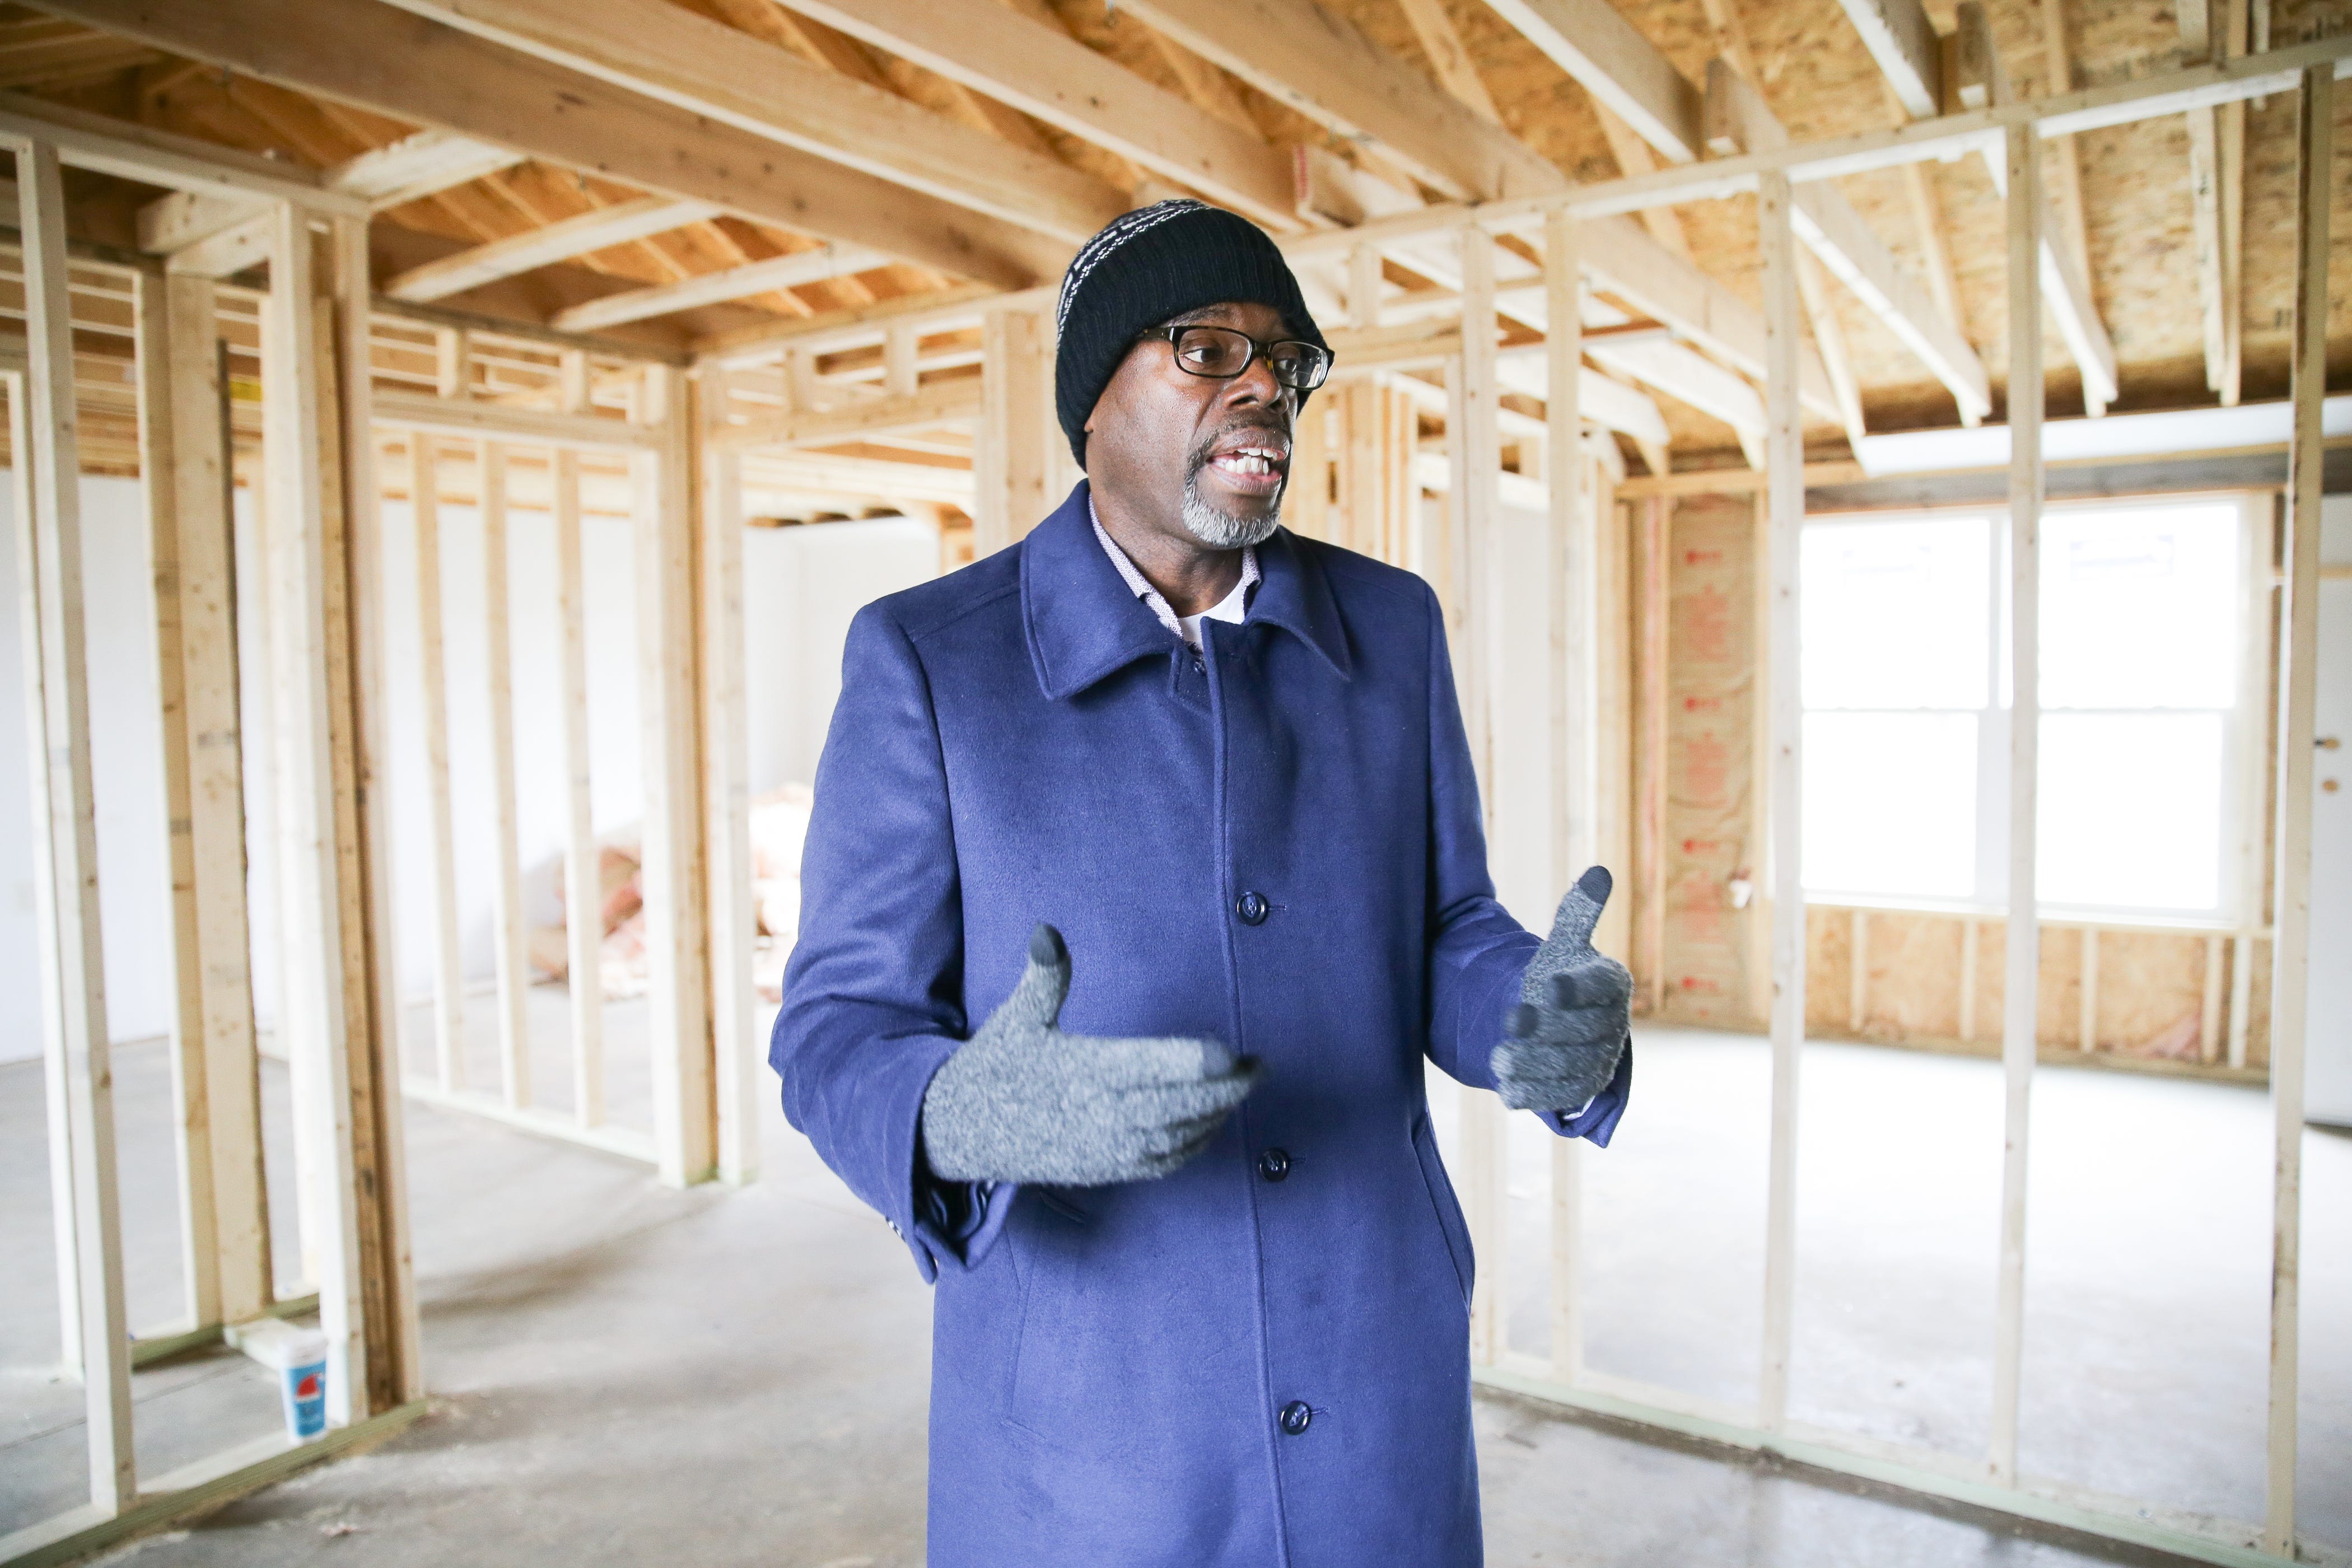 East-side church rebuilding homes and lives in forgotten neighborhood